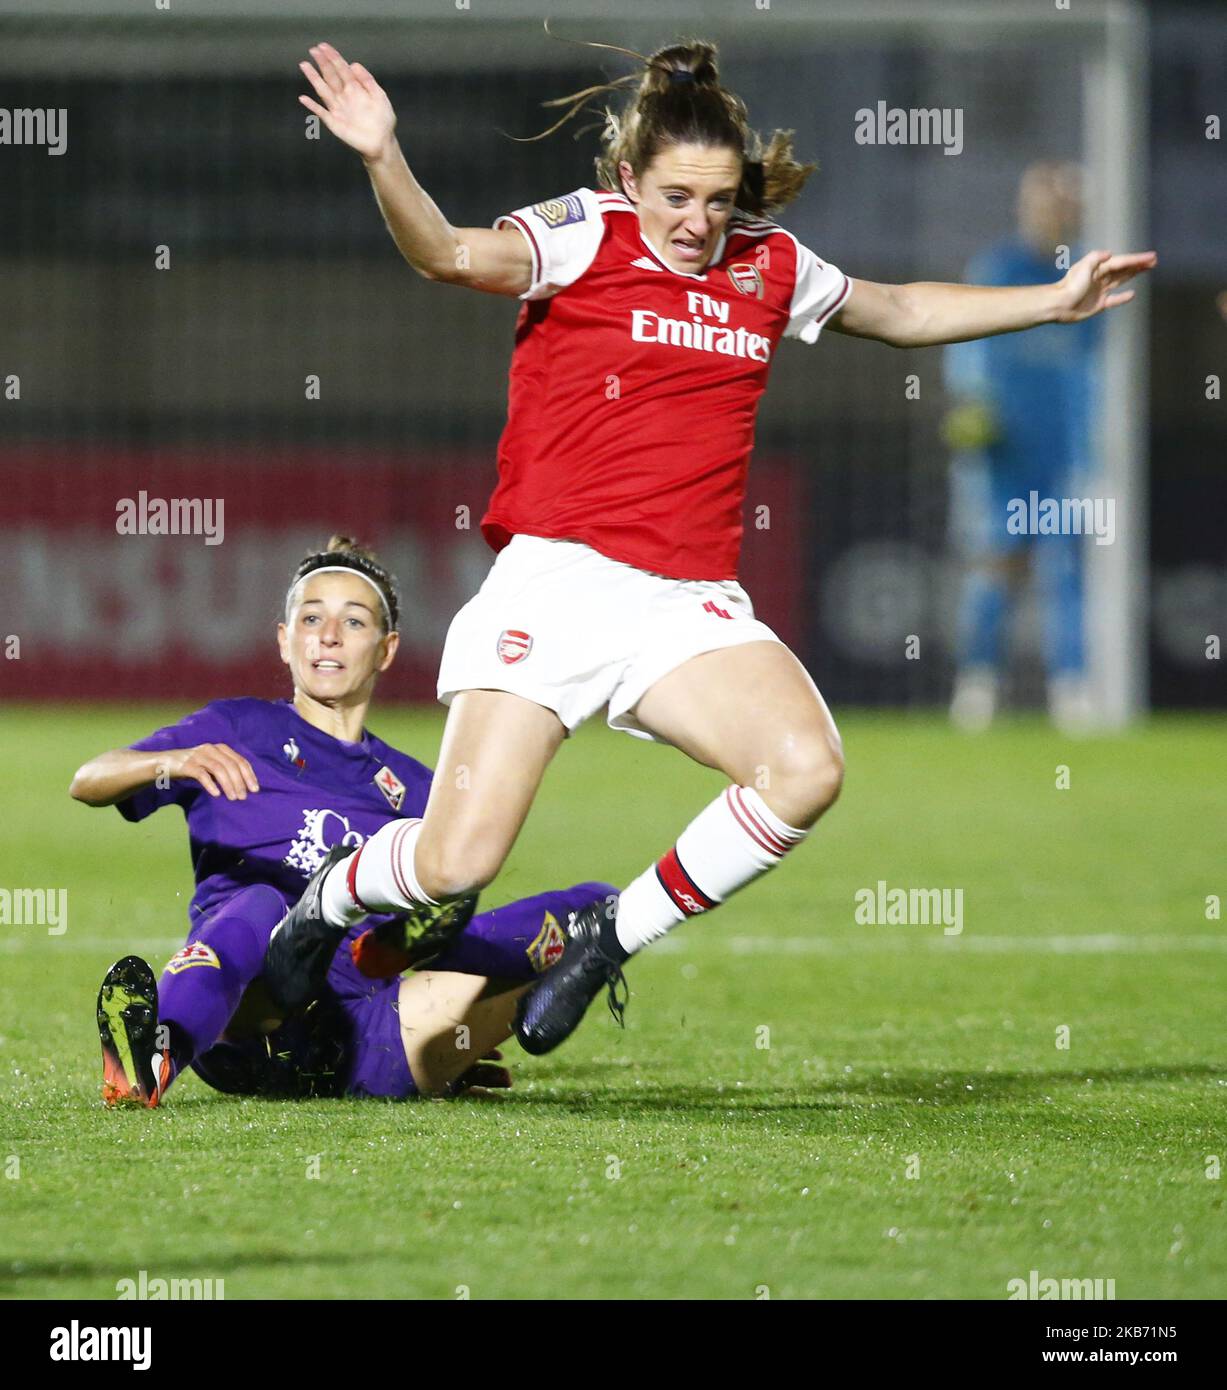 Greta Adami of ACF Fiorentina controls the ball during the Women News  Photo - Getty Images